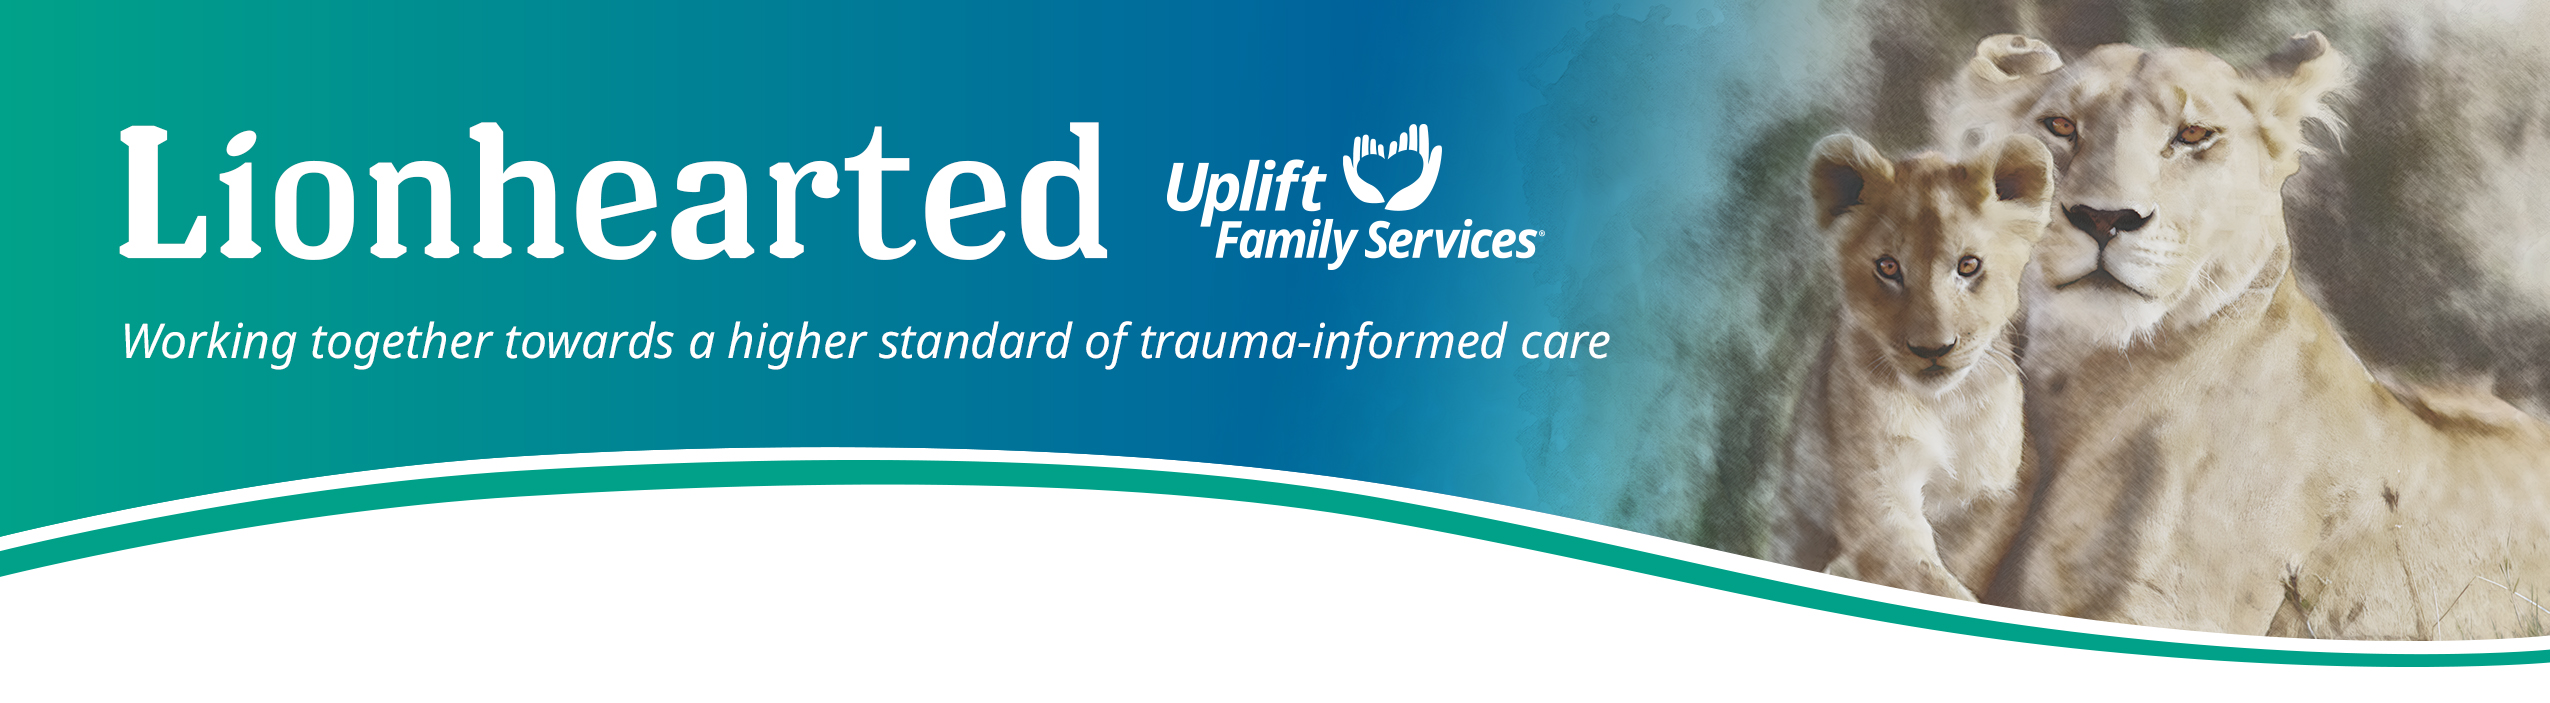 Lionhearted: Working together towards a higher standard of trauma-informed care header, self-care issue March 2020